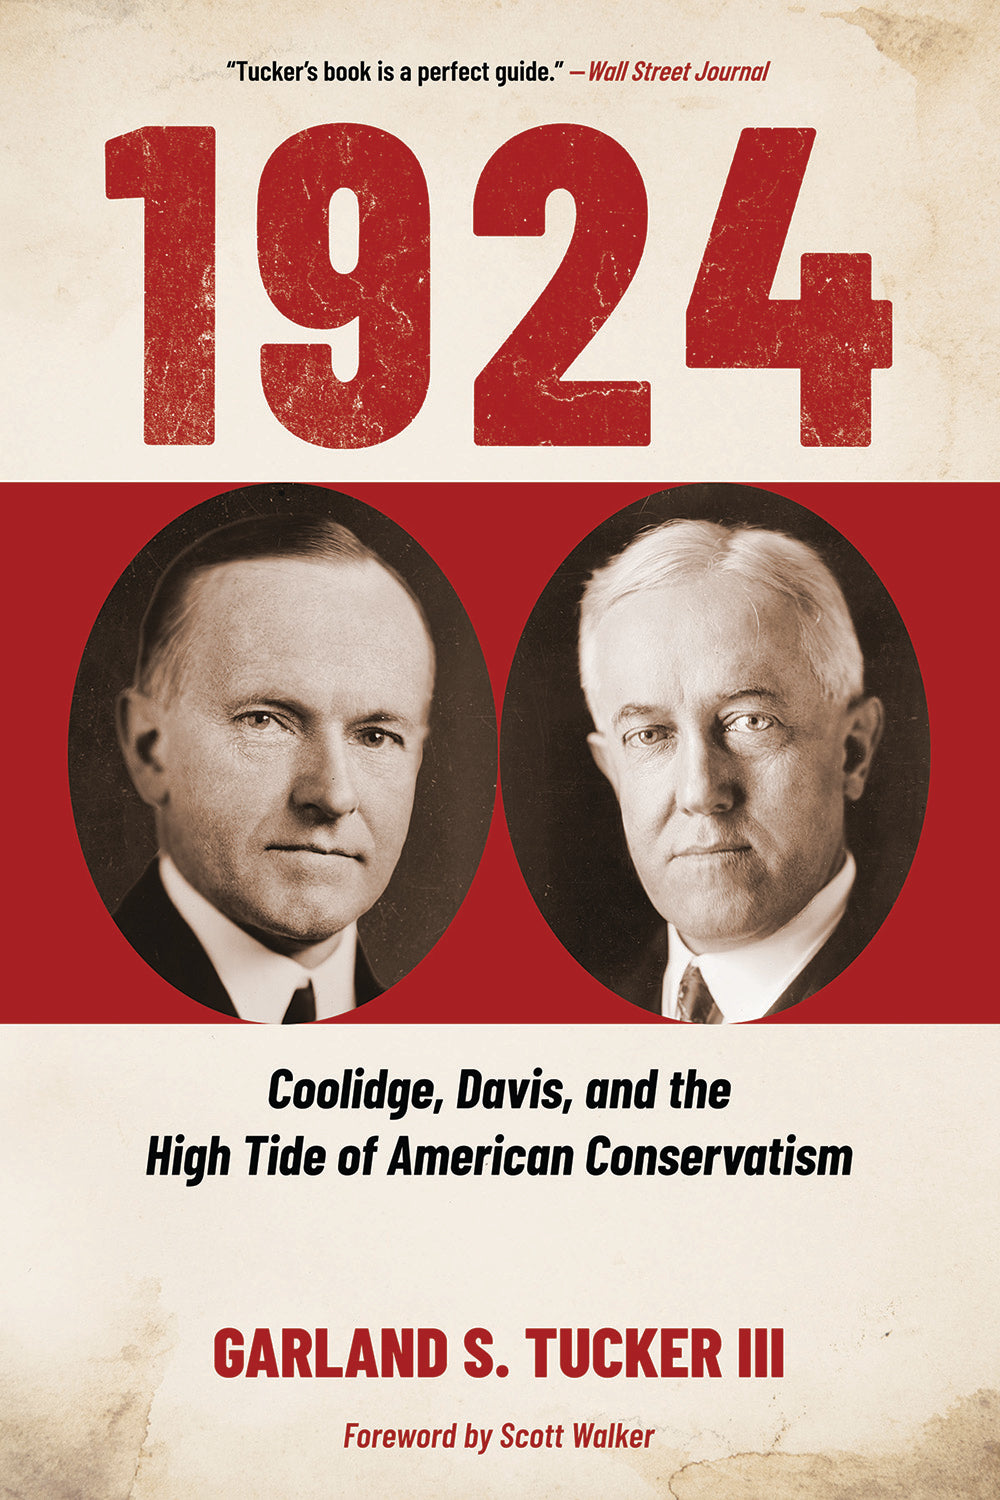 1924: Coolidge, Davis, and the High Tide of American Conservatism by Garland S. Tucker III